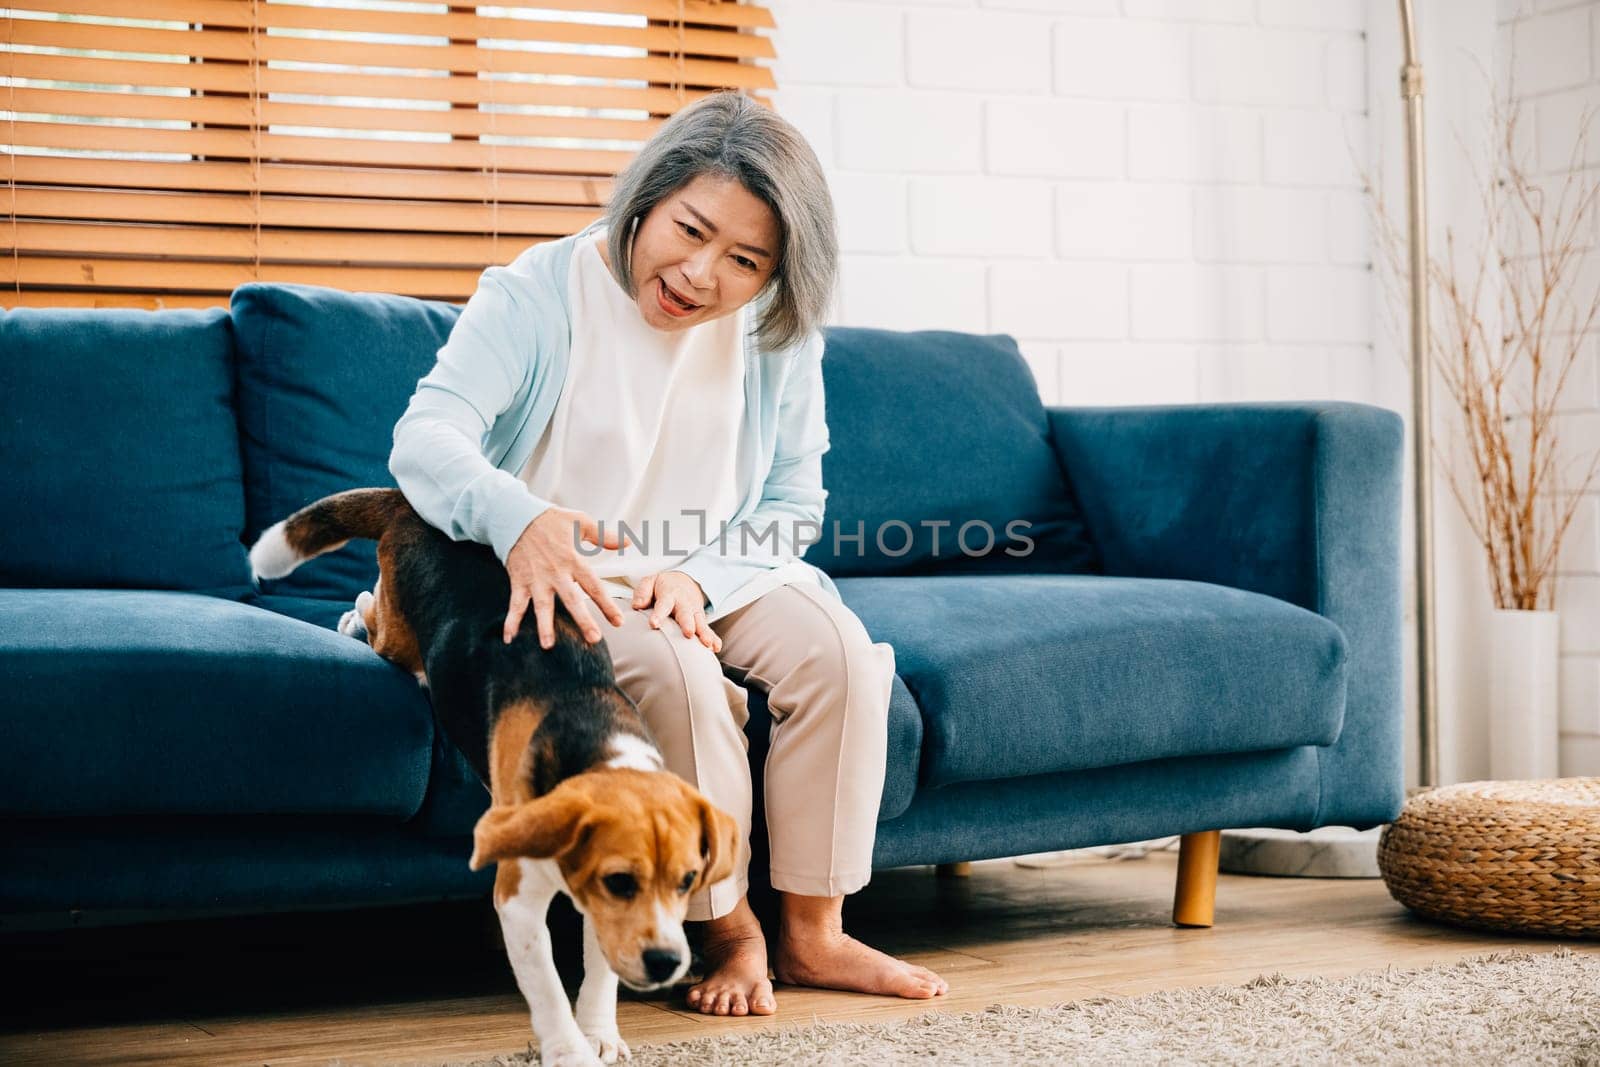 A portrait of love and joy, An elderly woman and her Beagle puppy share a heartwarming moment in their living room. Their friendship and smiles illuminate the room, creating a haven of happiness.